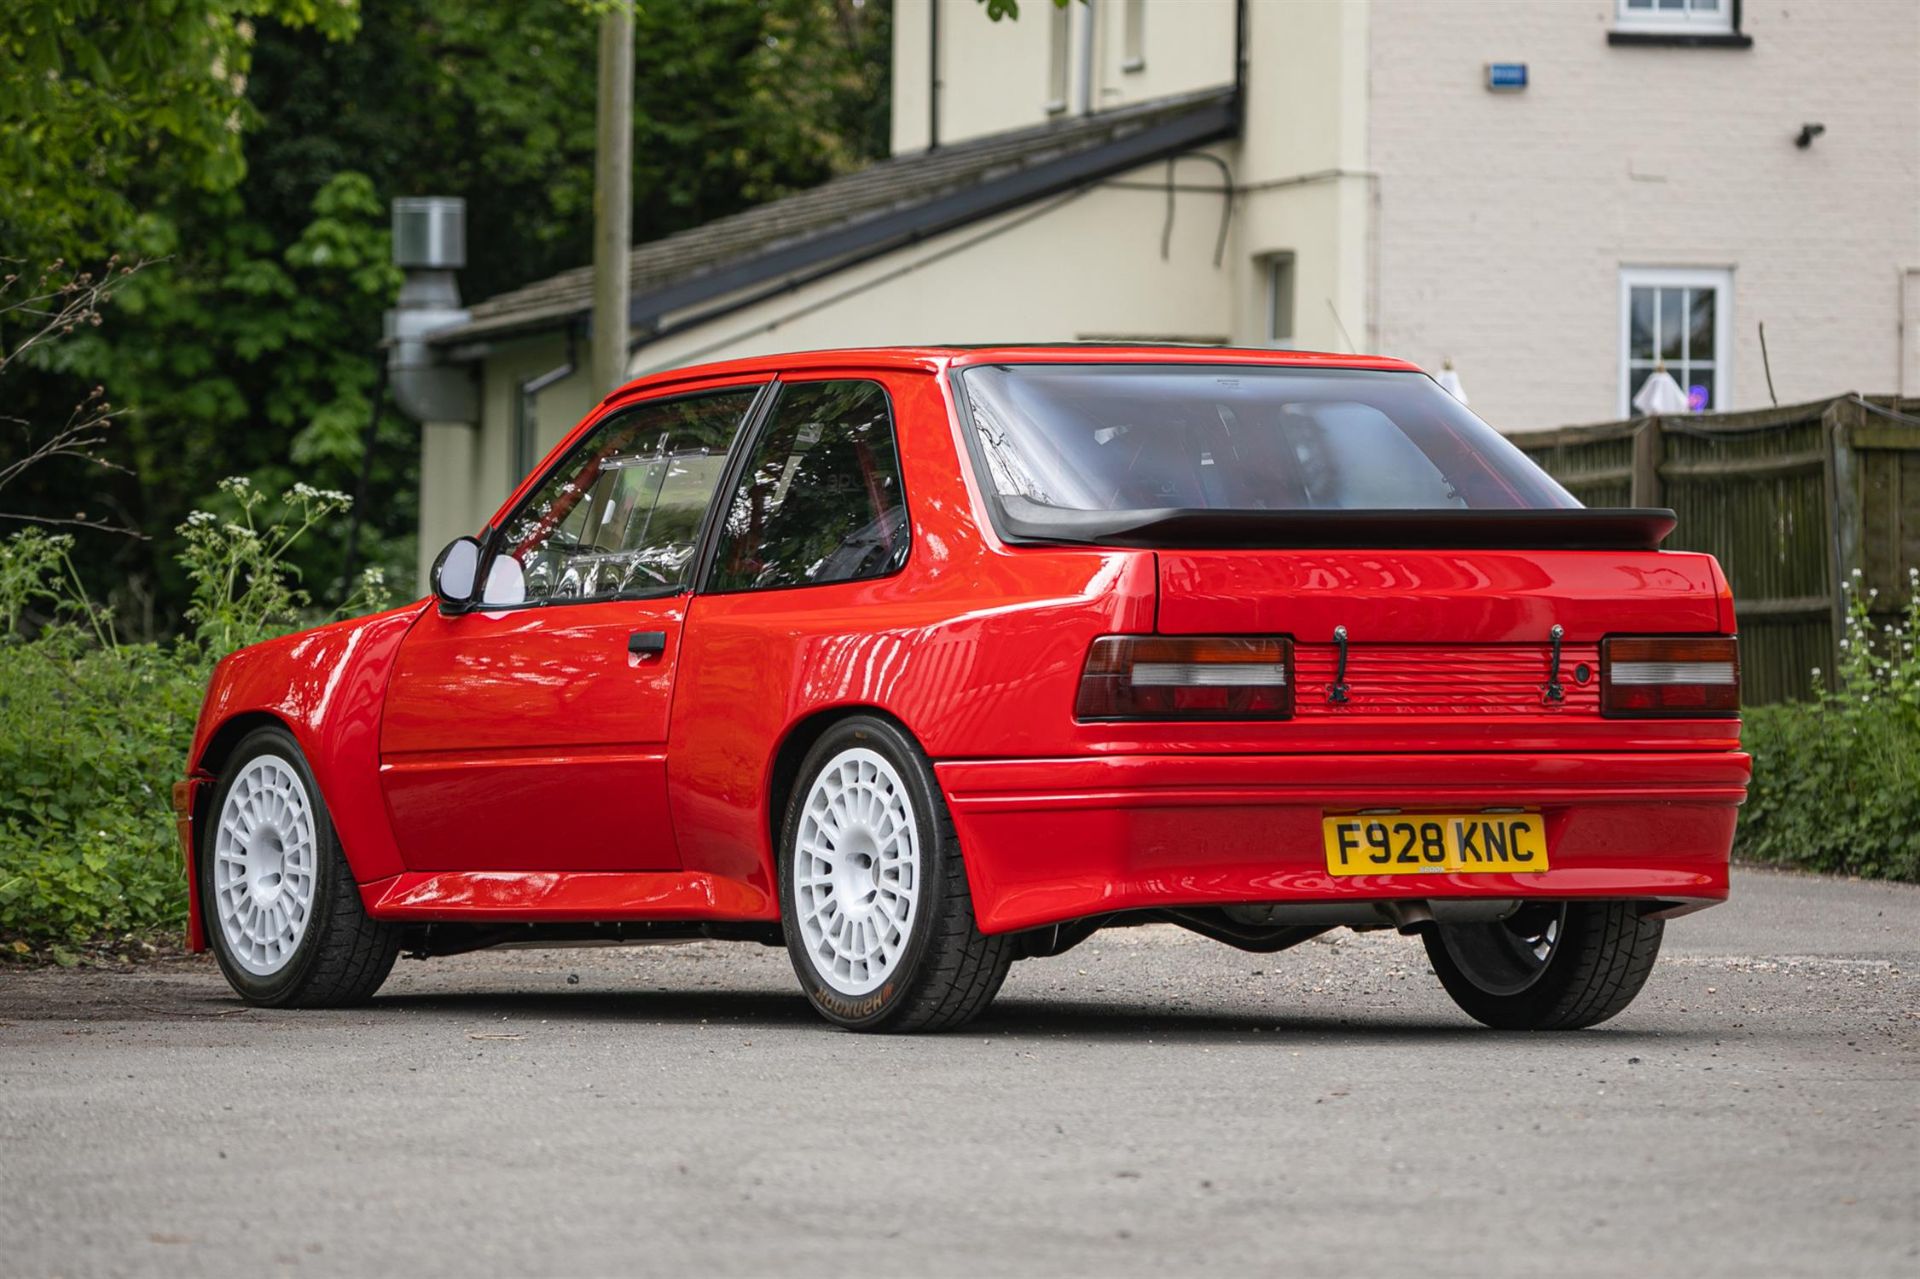 1988 Peugeot 309 GTi 16v Supercharged 'Maxi' Rally Special - Image 4 of 10